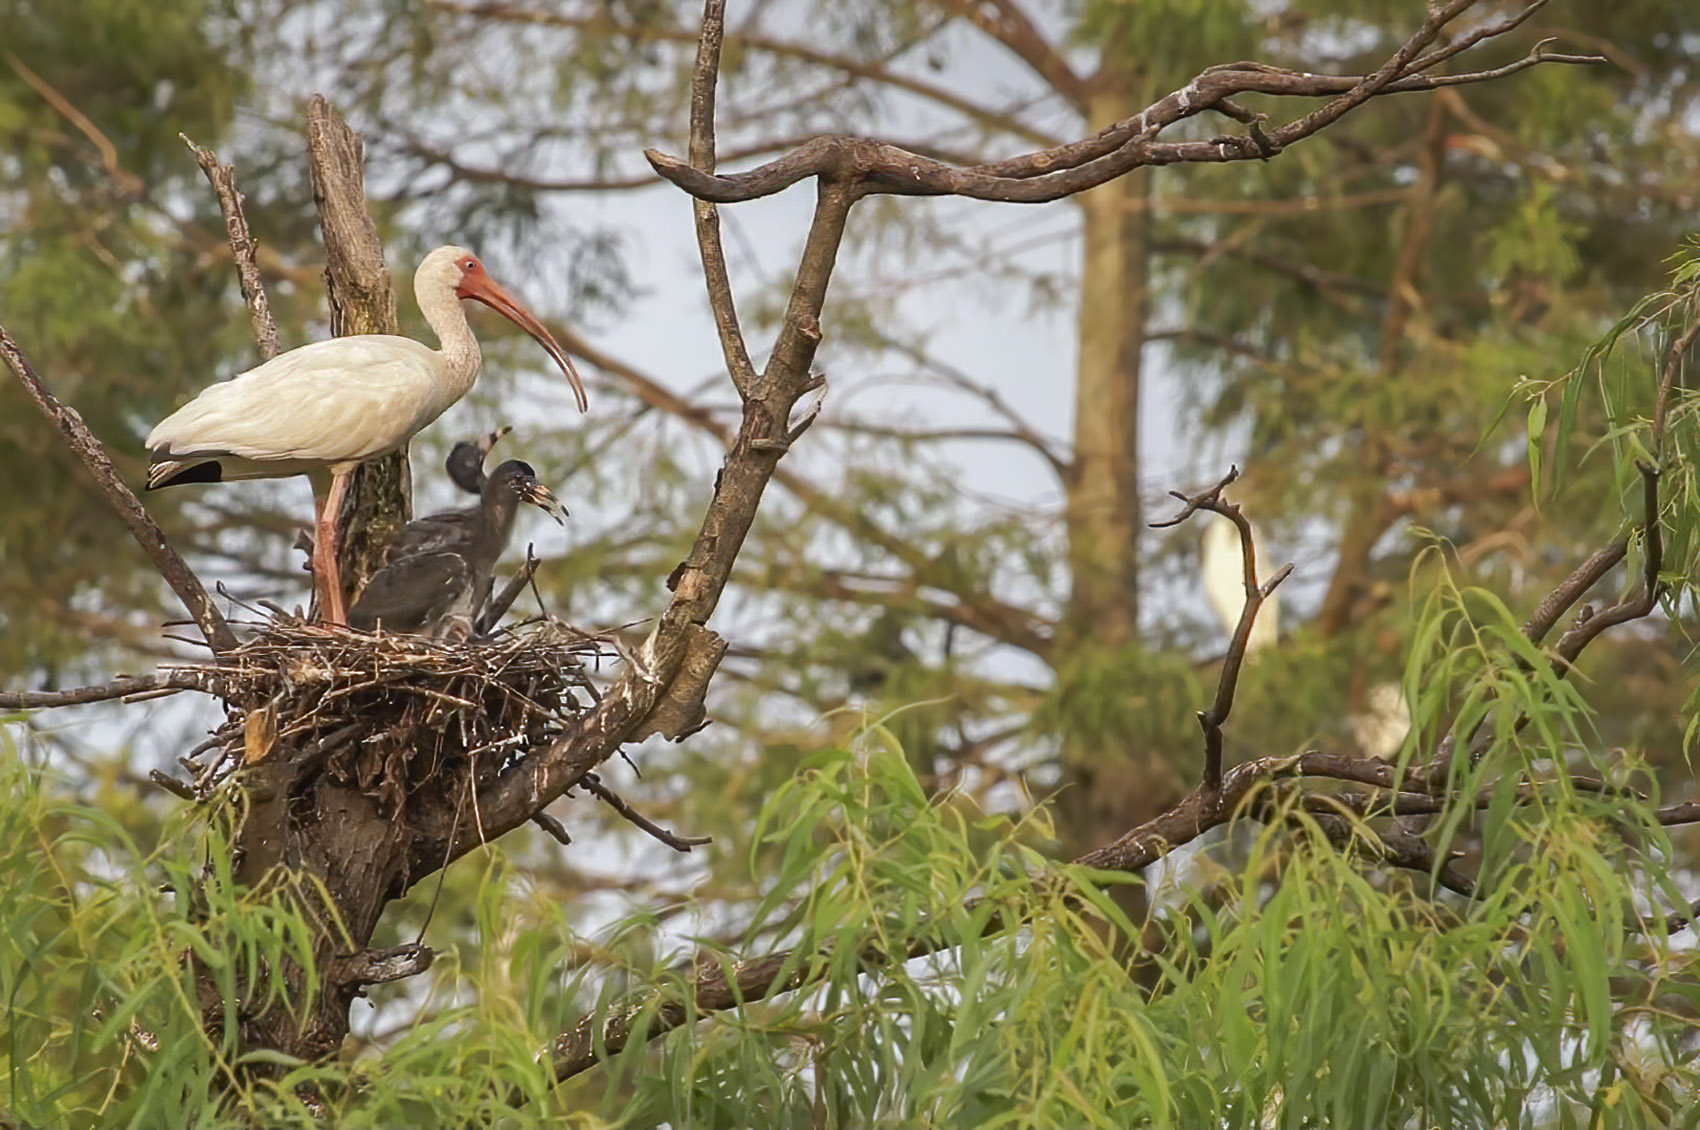 A White Ibis with its young on a nest in the Jefferson Island Rookery